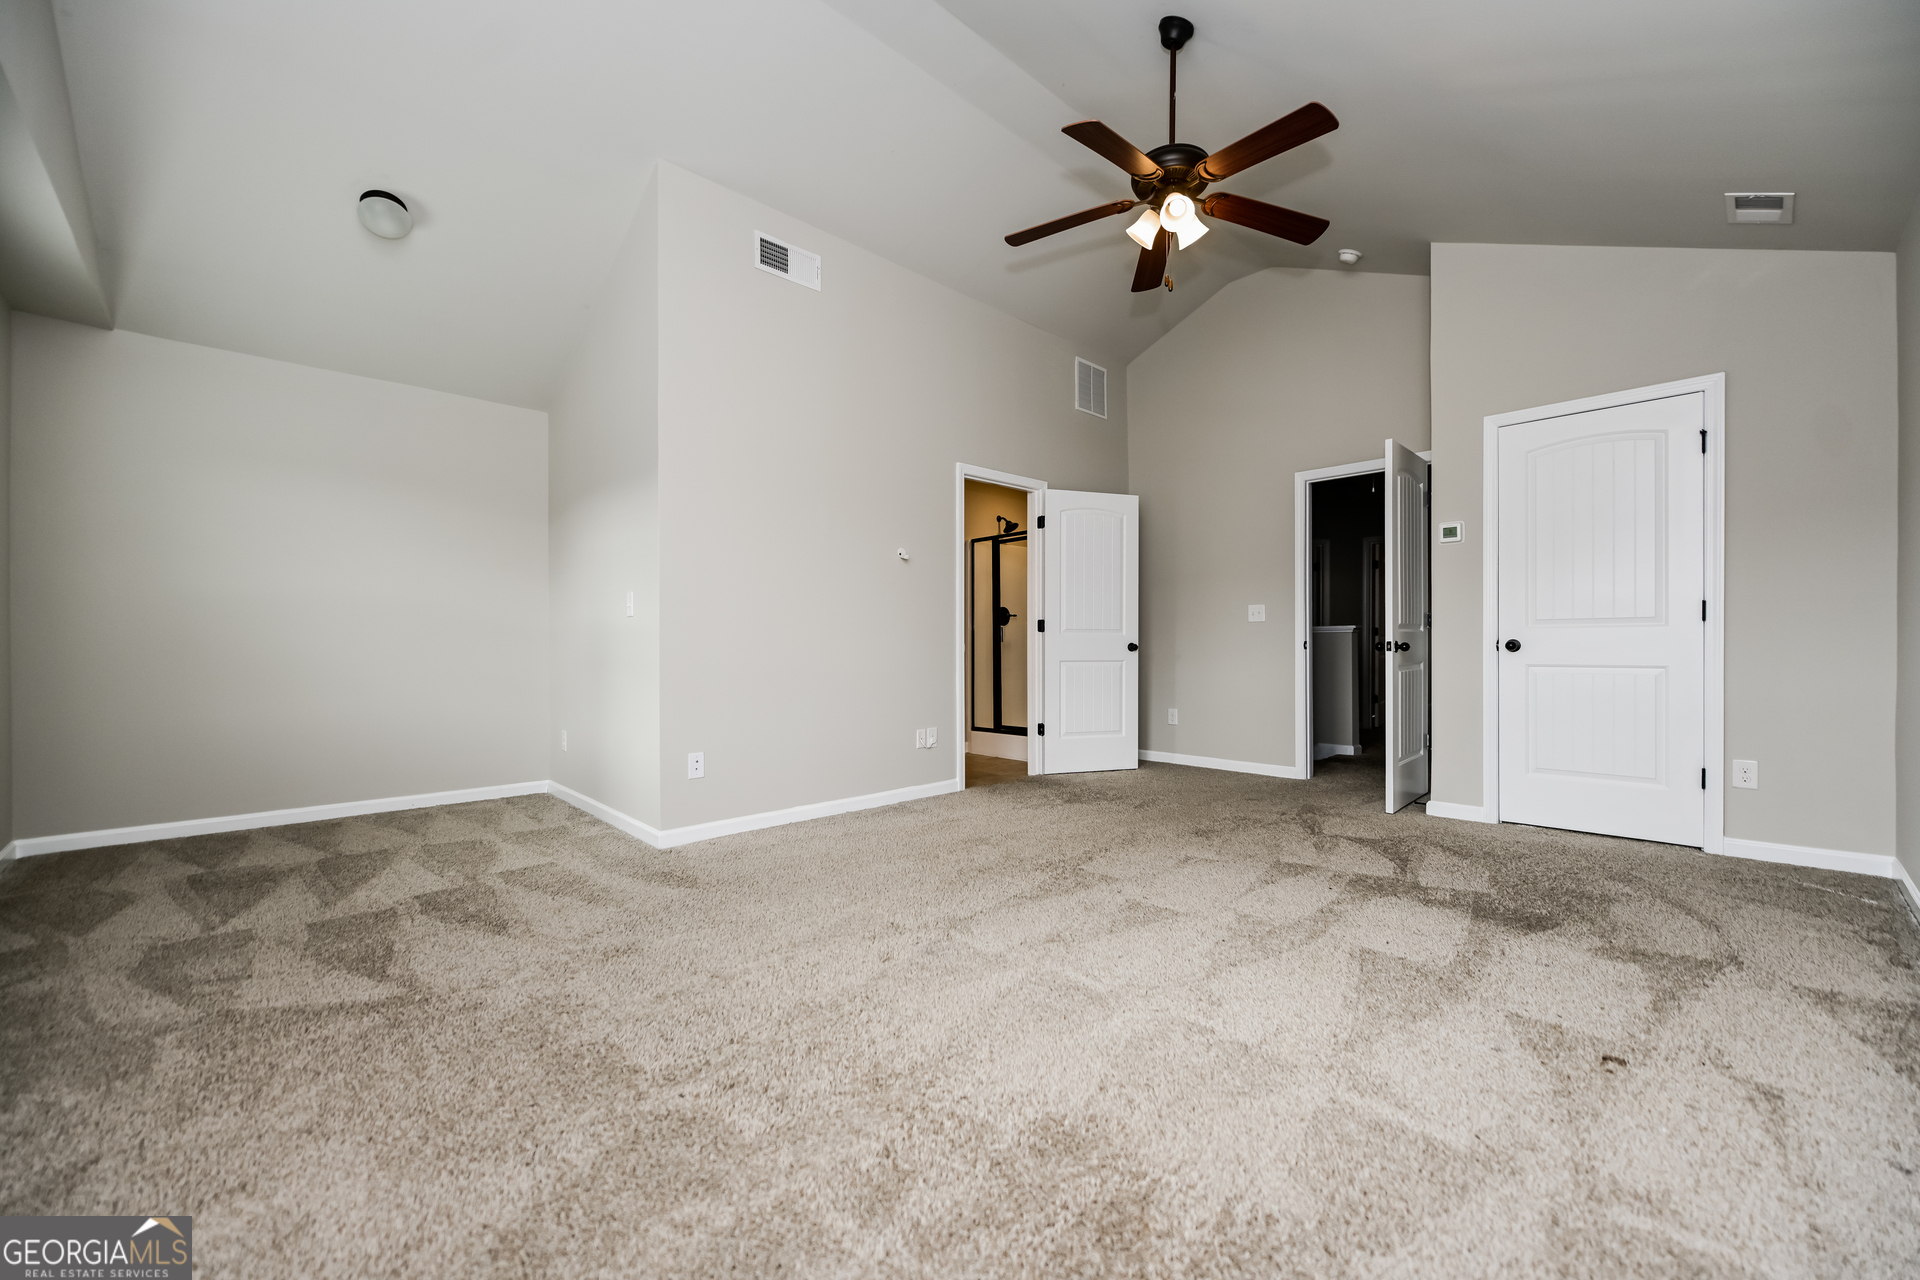 Photo 9 of 16 of 1042 McConaughy CT townhome